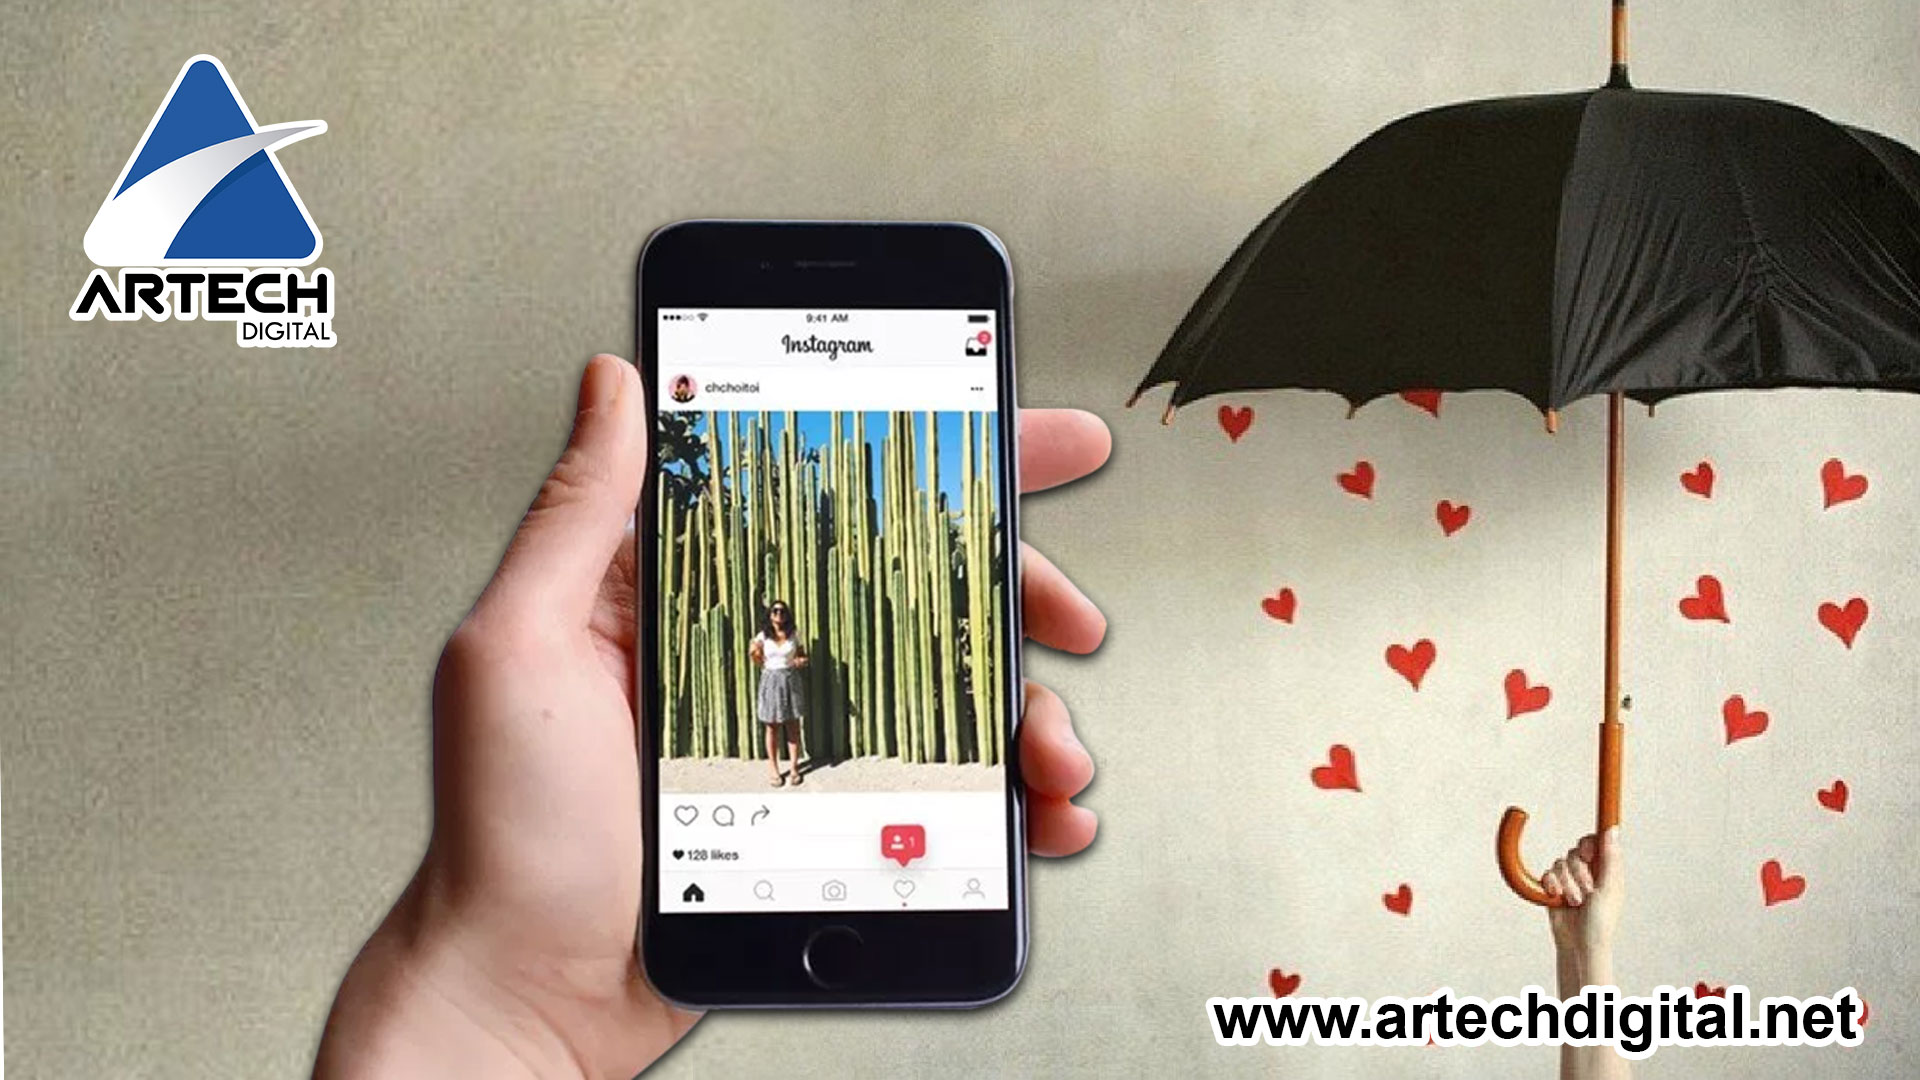 Find out what “Emotional Communication in Instagram” is and turn it into a LoveMark.